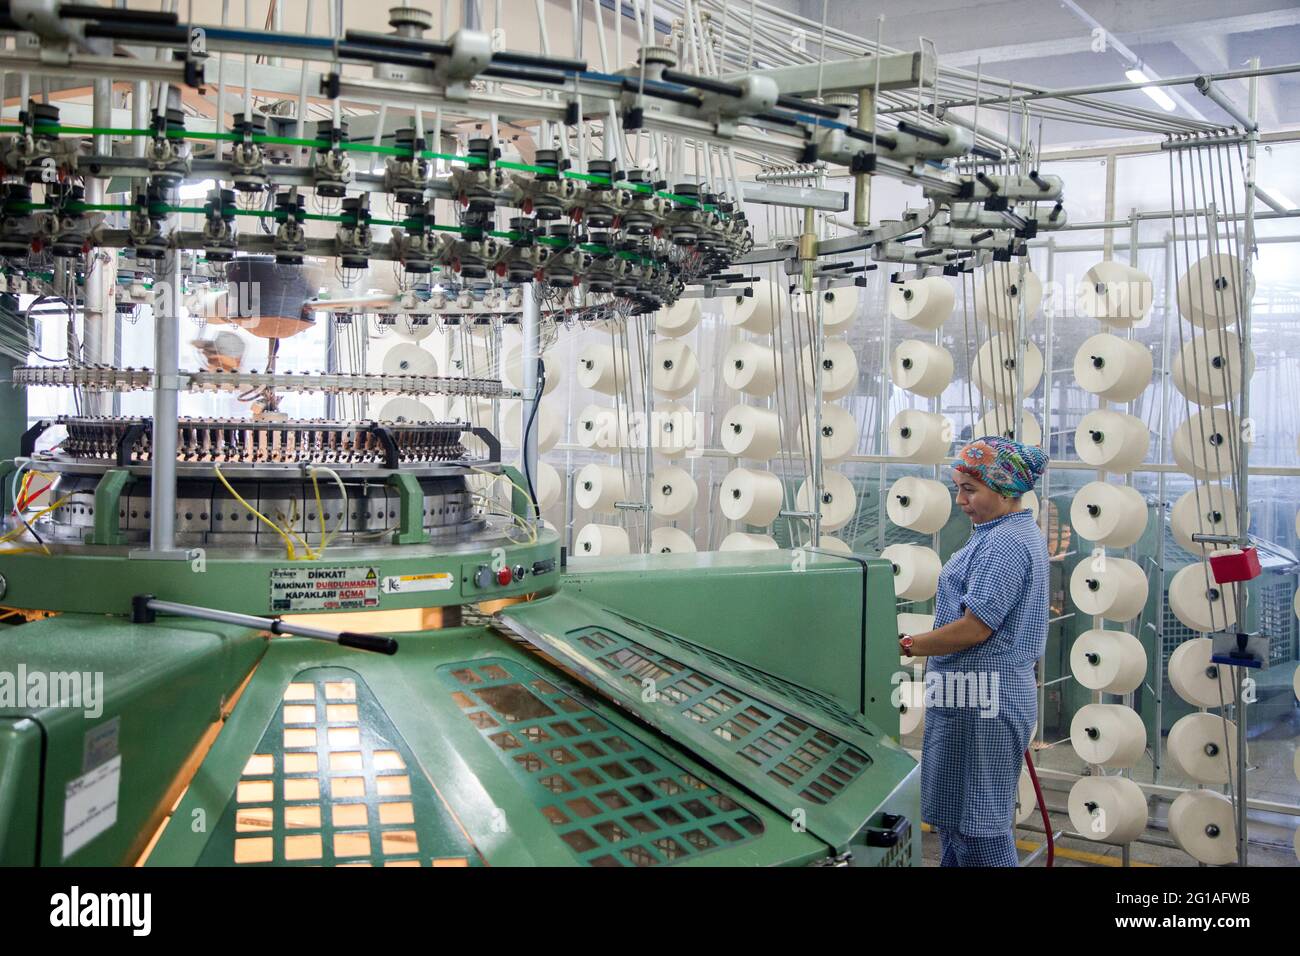 Istanbul/Turkey - 08-26-2014: An unknown female worker works in a factory that produces cotton yarn. Stock Photo